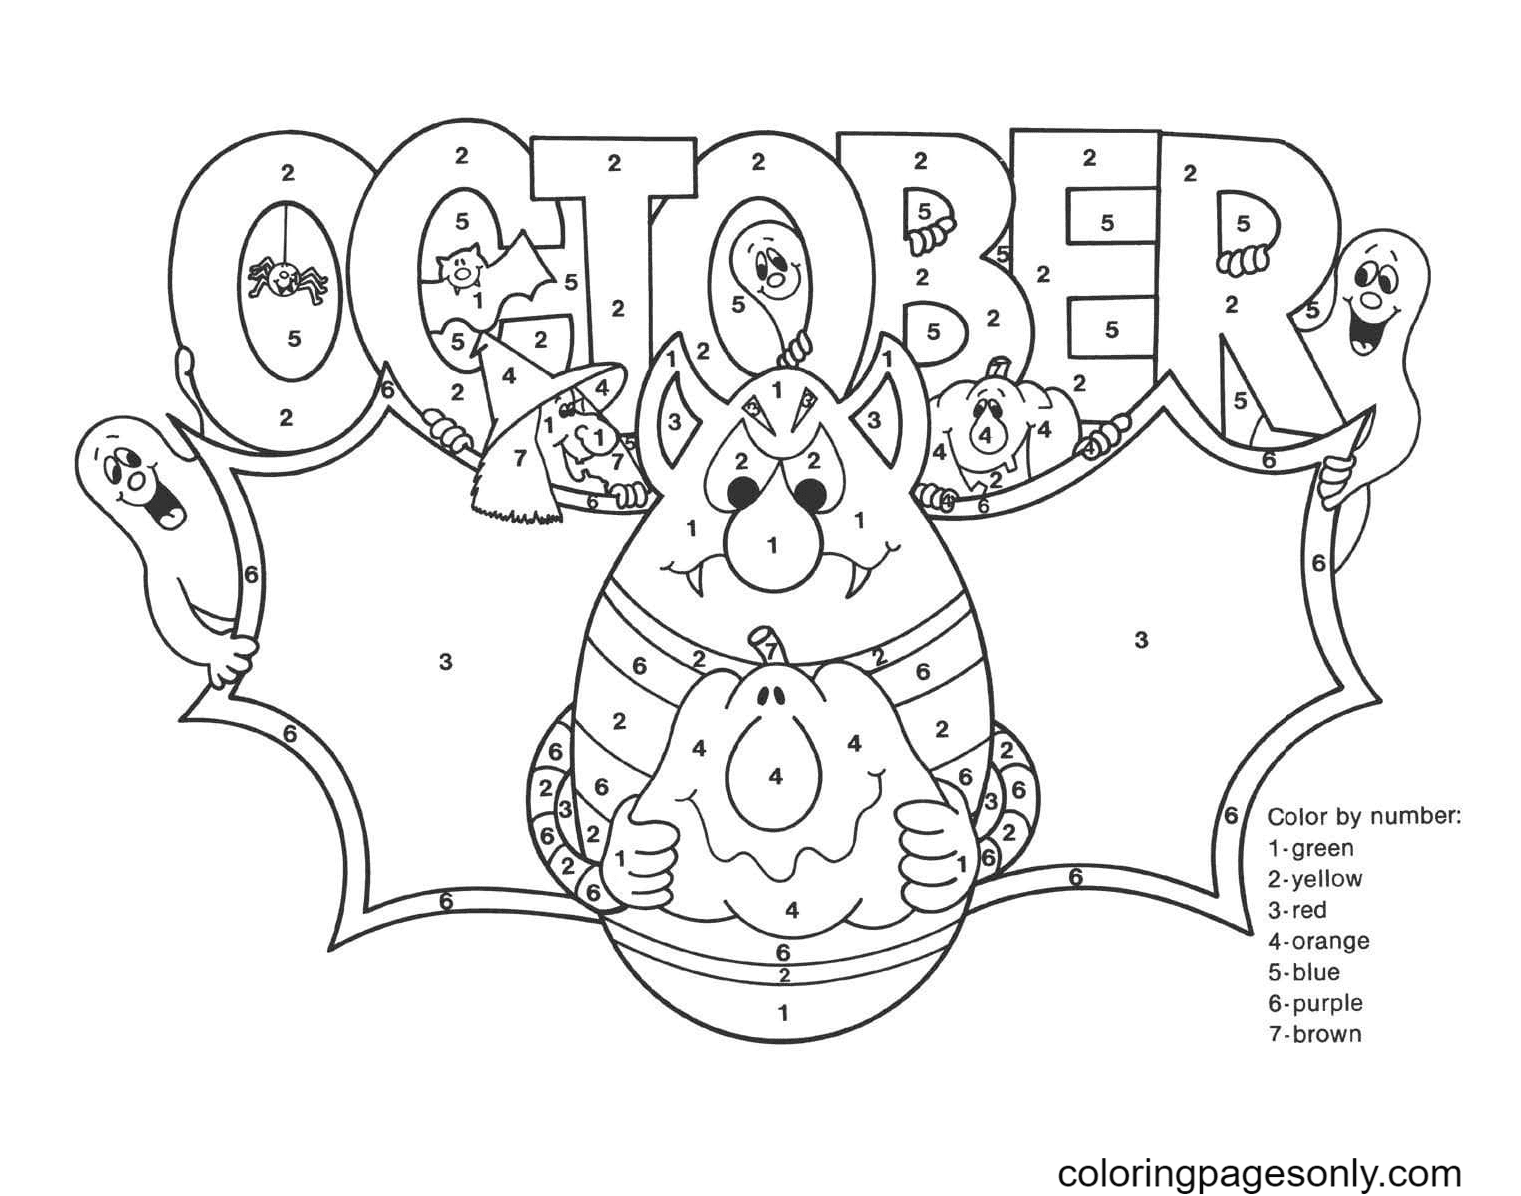 Color October by numbers Coloring Page